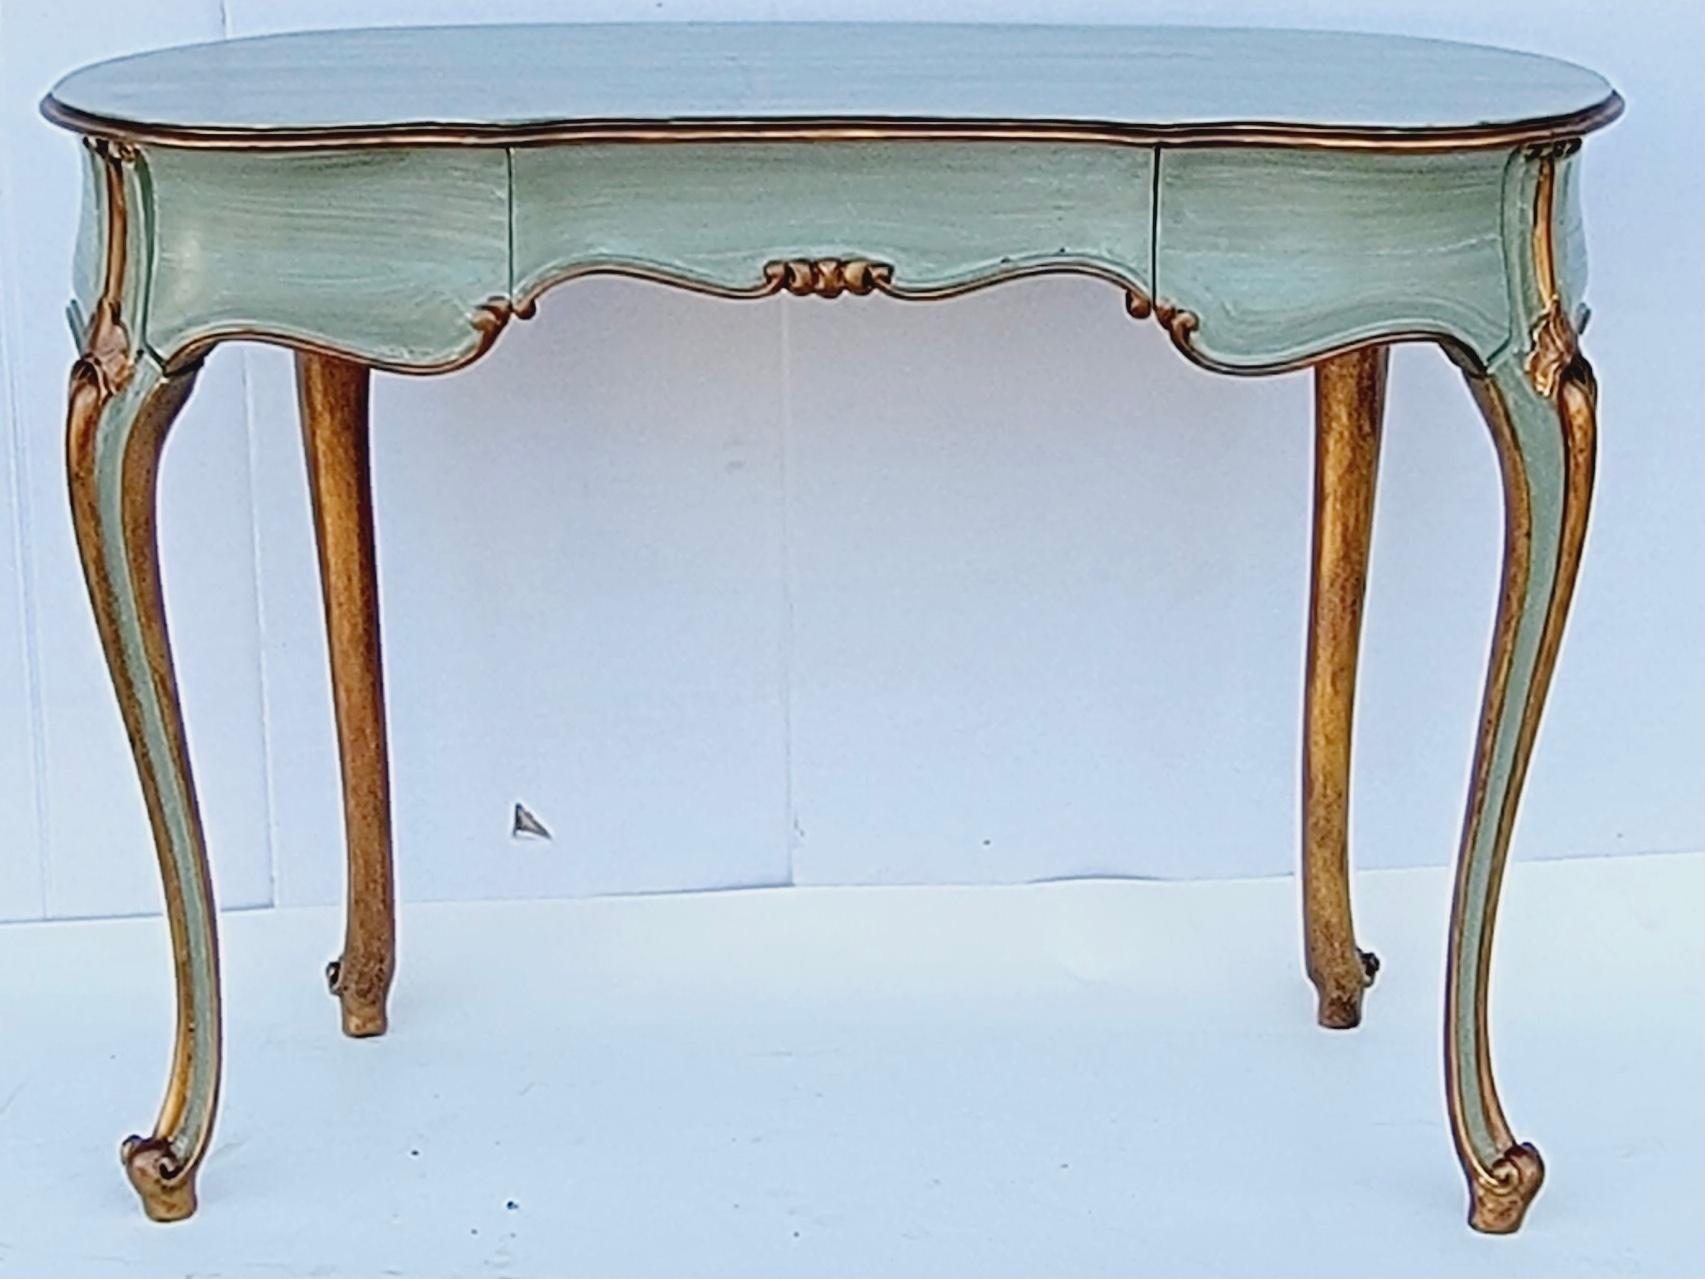 20th Century French Carved and Painted Giltwood Kidney Shape Desk / Vanity / Table